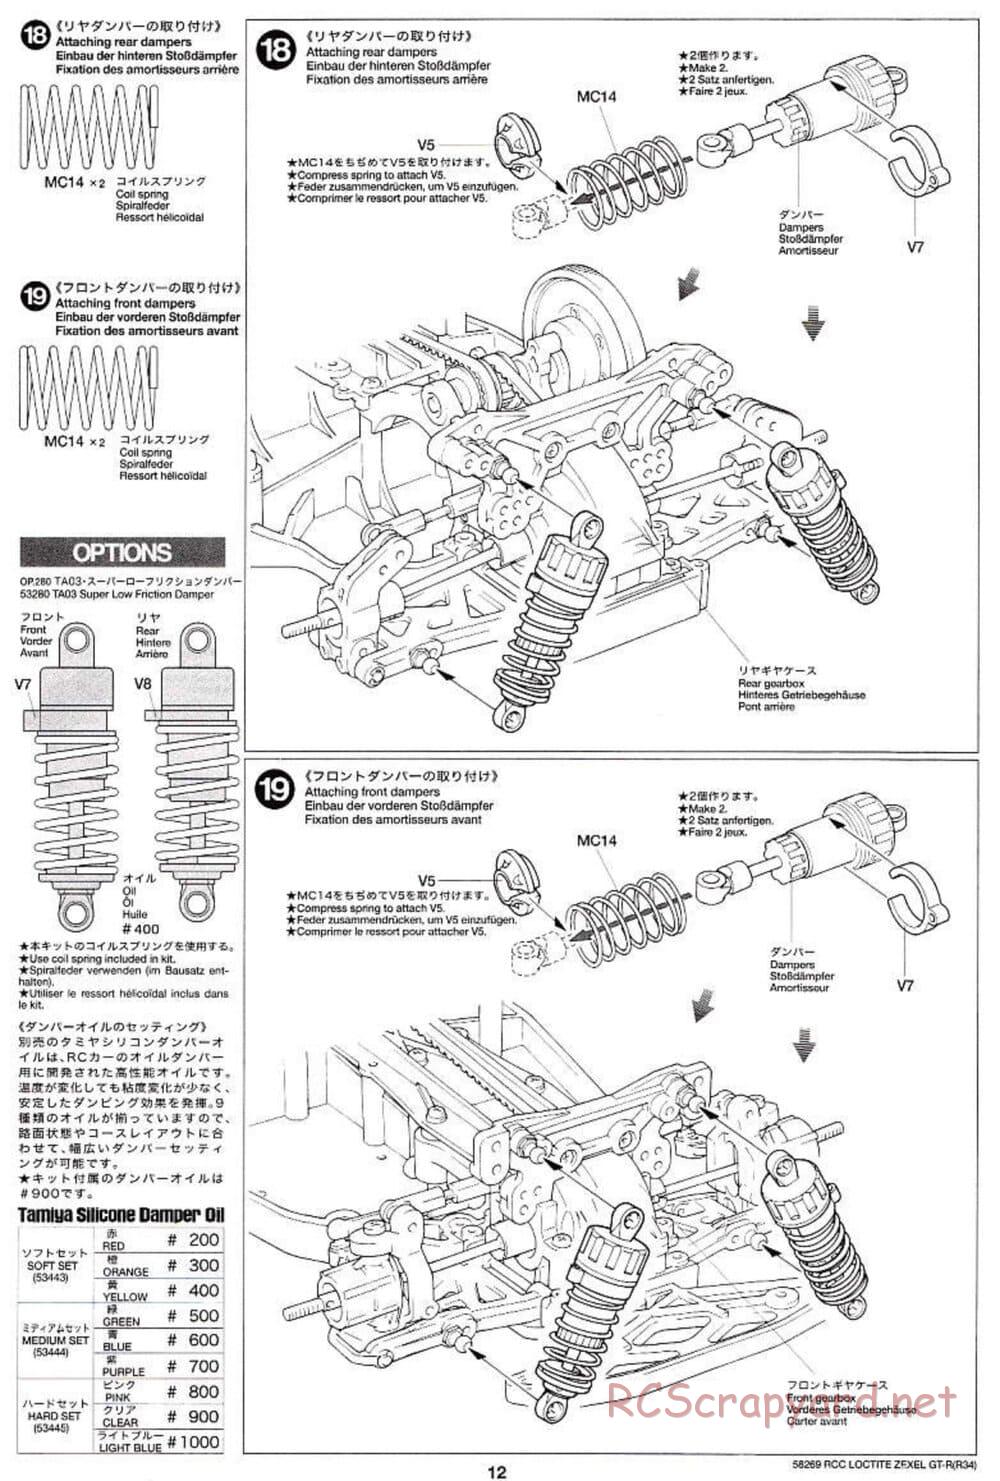 Tamiya - Loctite Zexel Skyline GT-R (R34) - TA-04 Chassis - Manual - Page 12